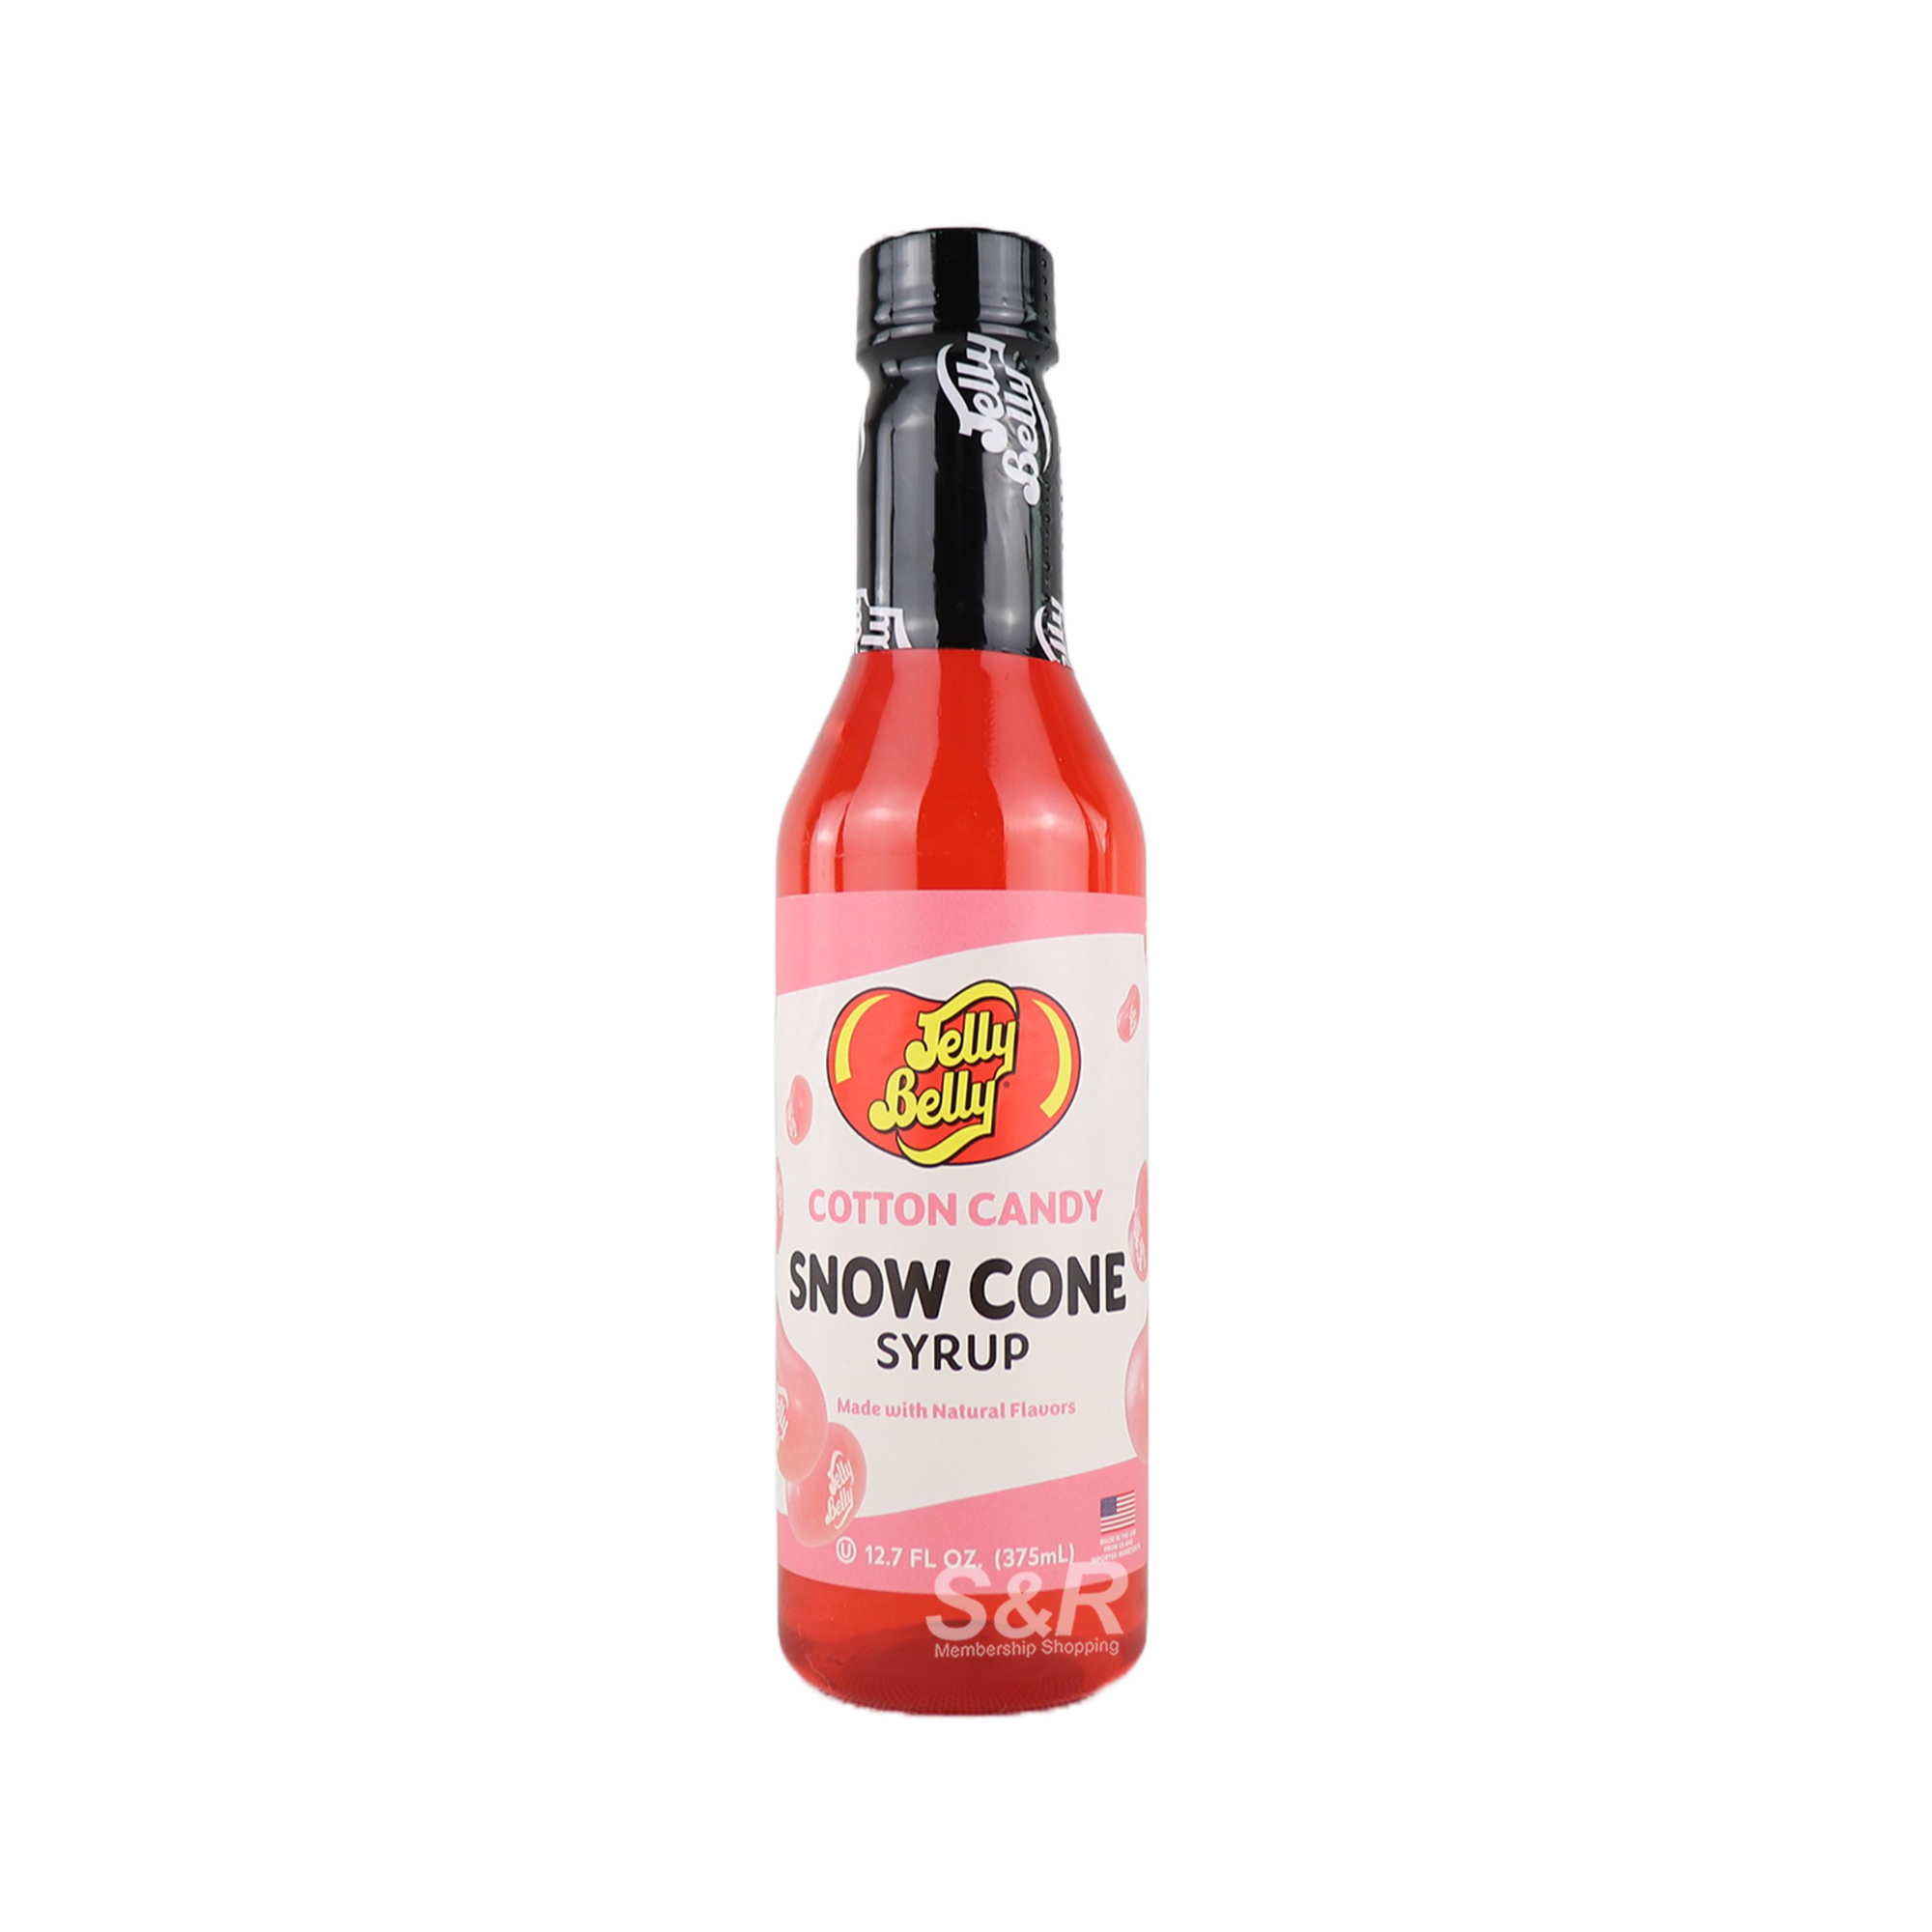 Jelly Belly Cotton Candy Snow Cone Syrup 375mL